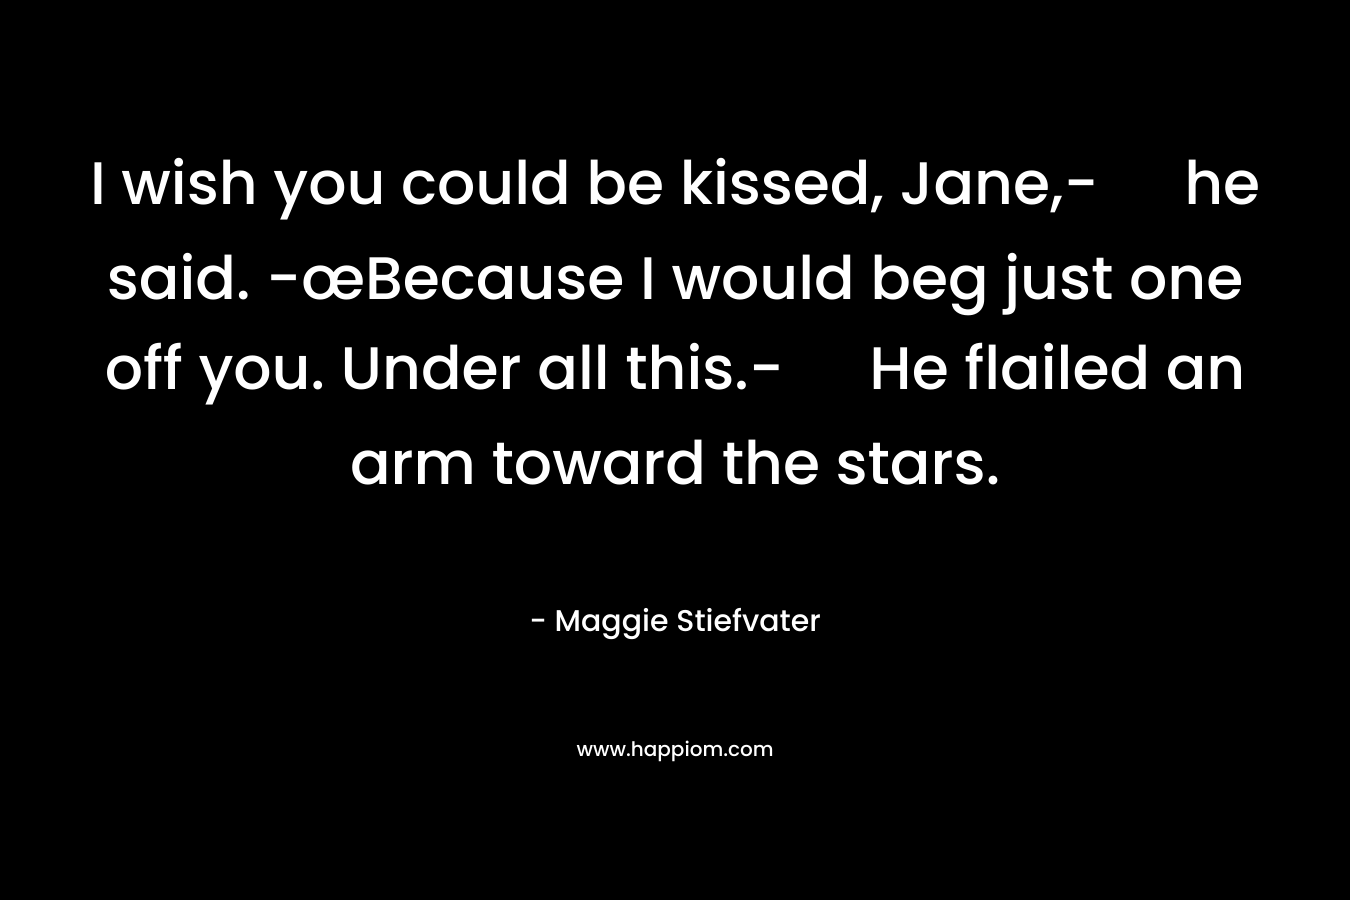 I wish you could be kissed, Jane,- he said. -œBecause I would beg just one off you. Under all this.- He flailed an arm toward the stars.